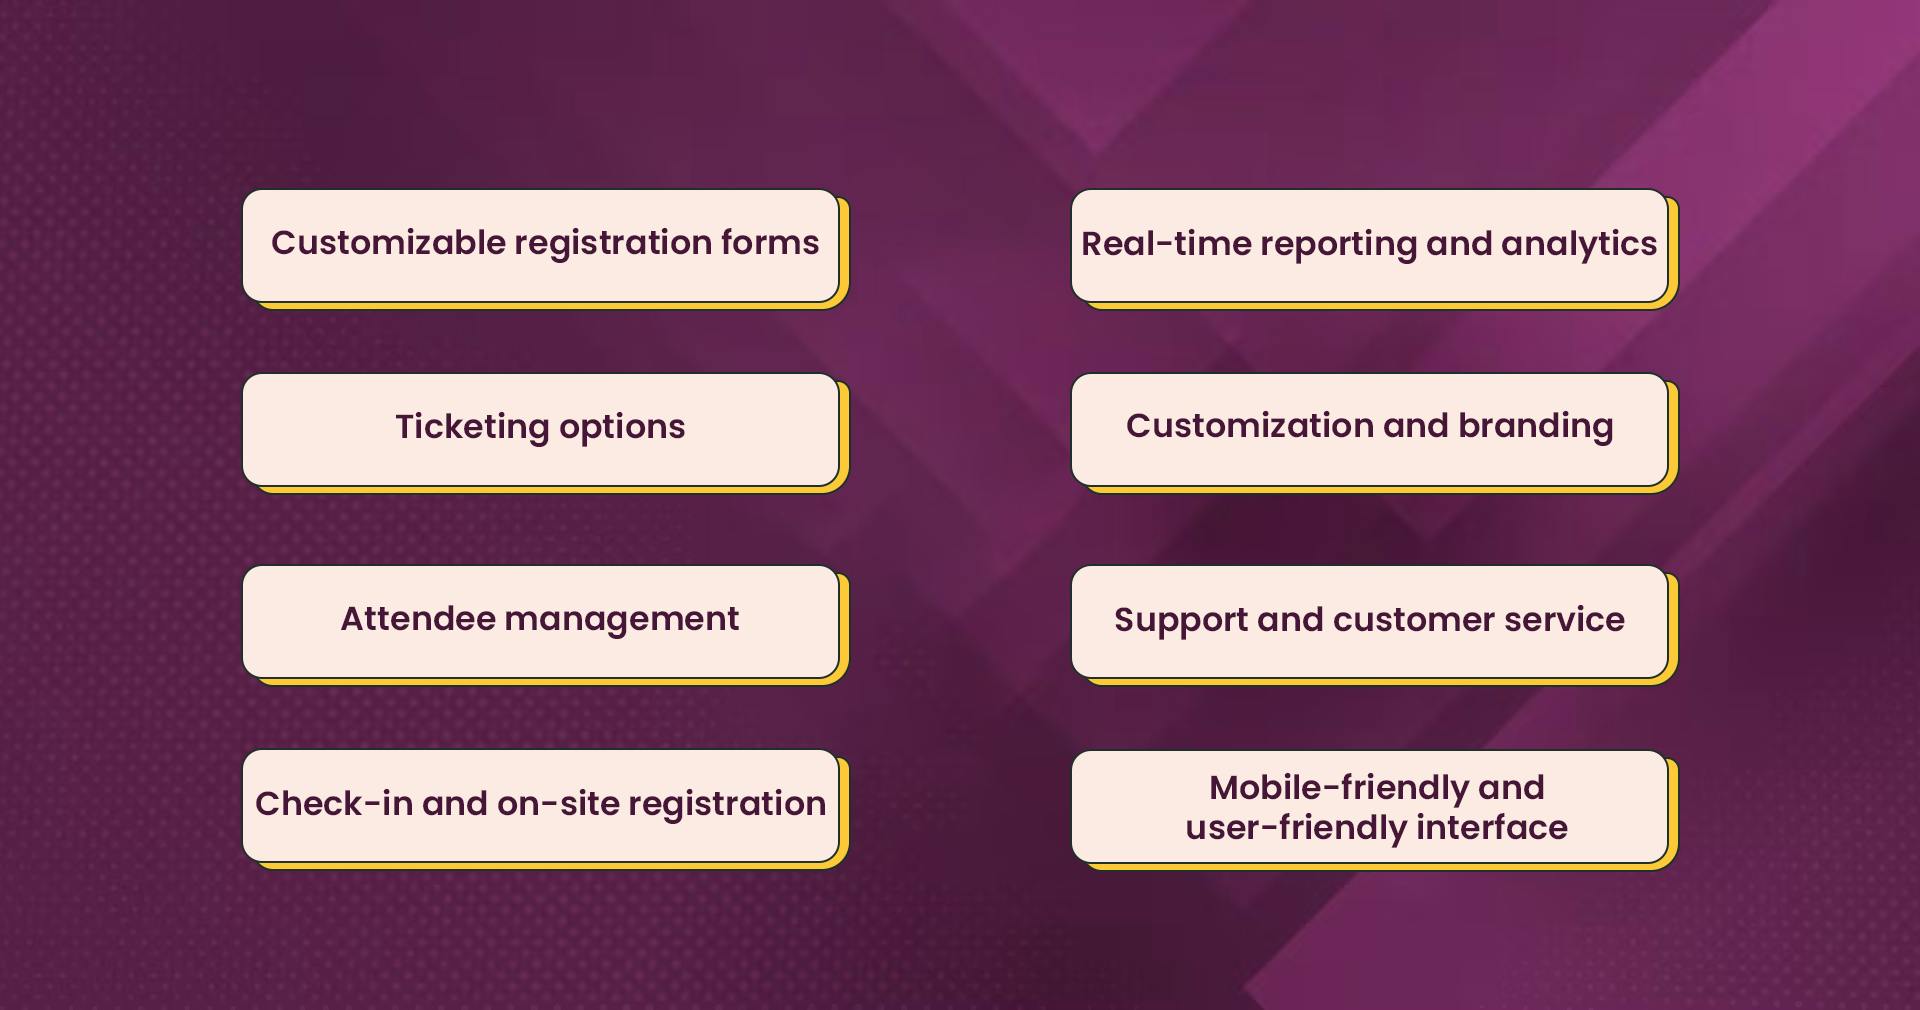 Key features to look for in an event registration software